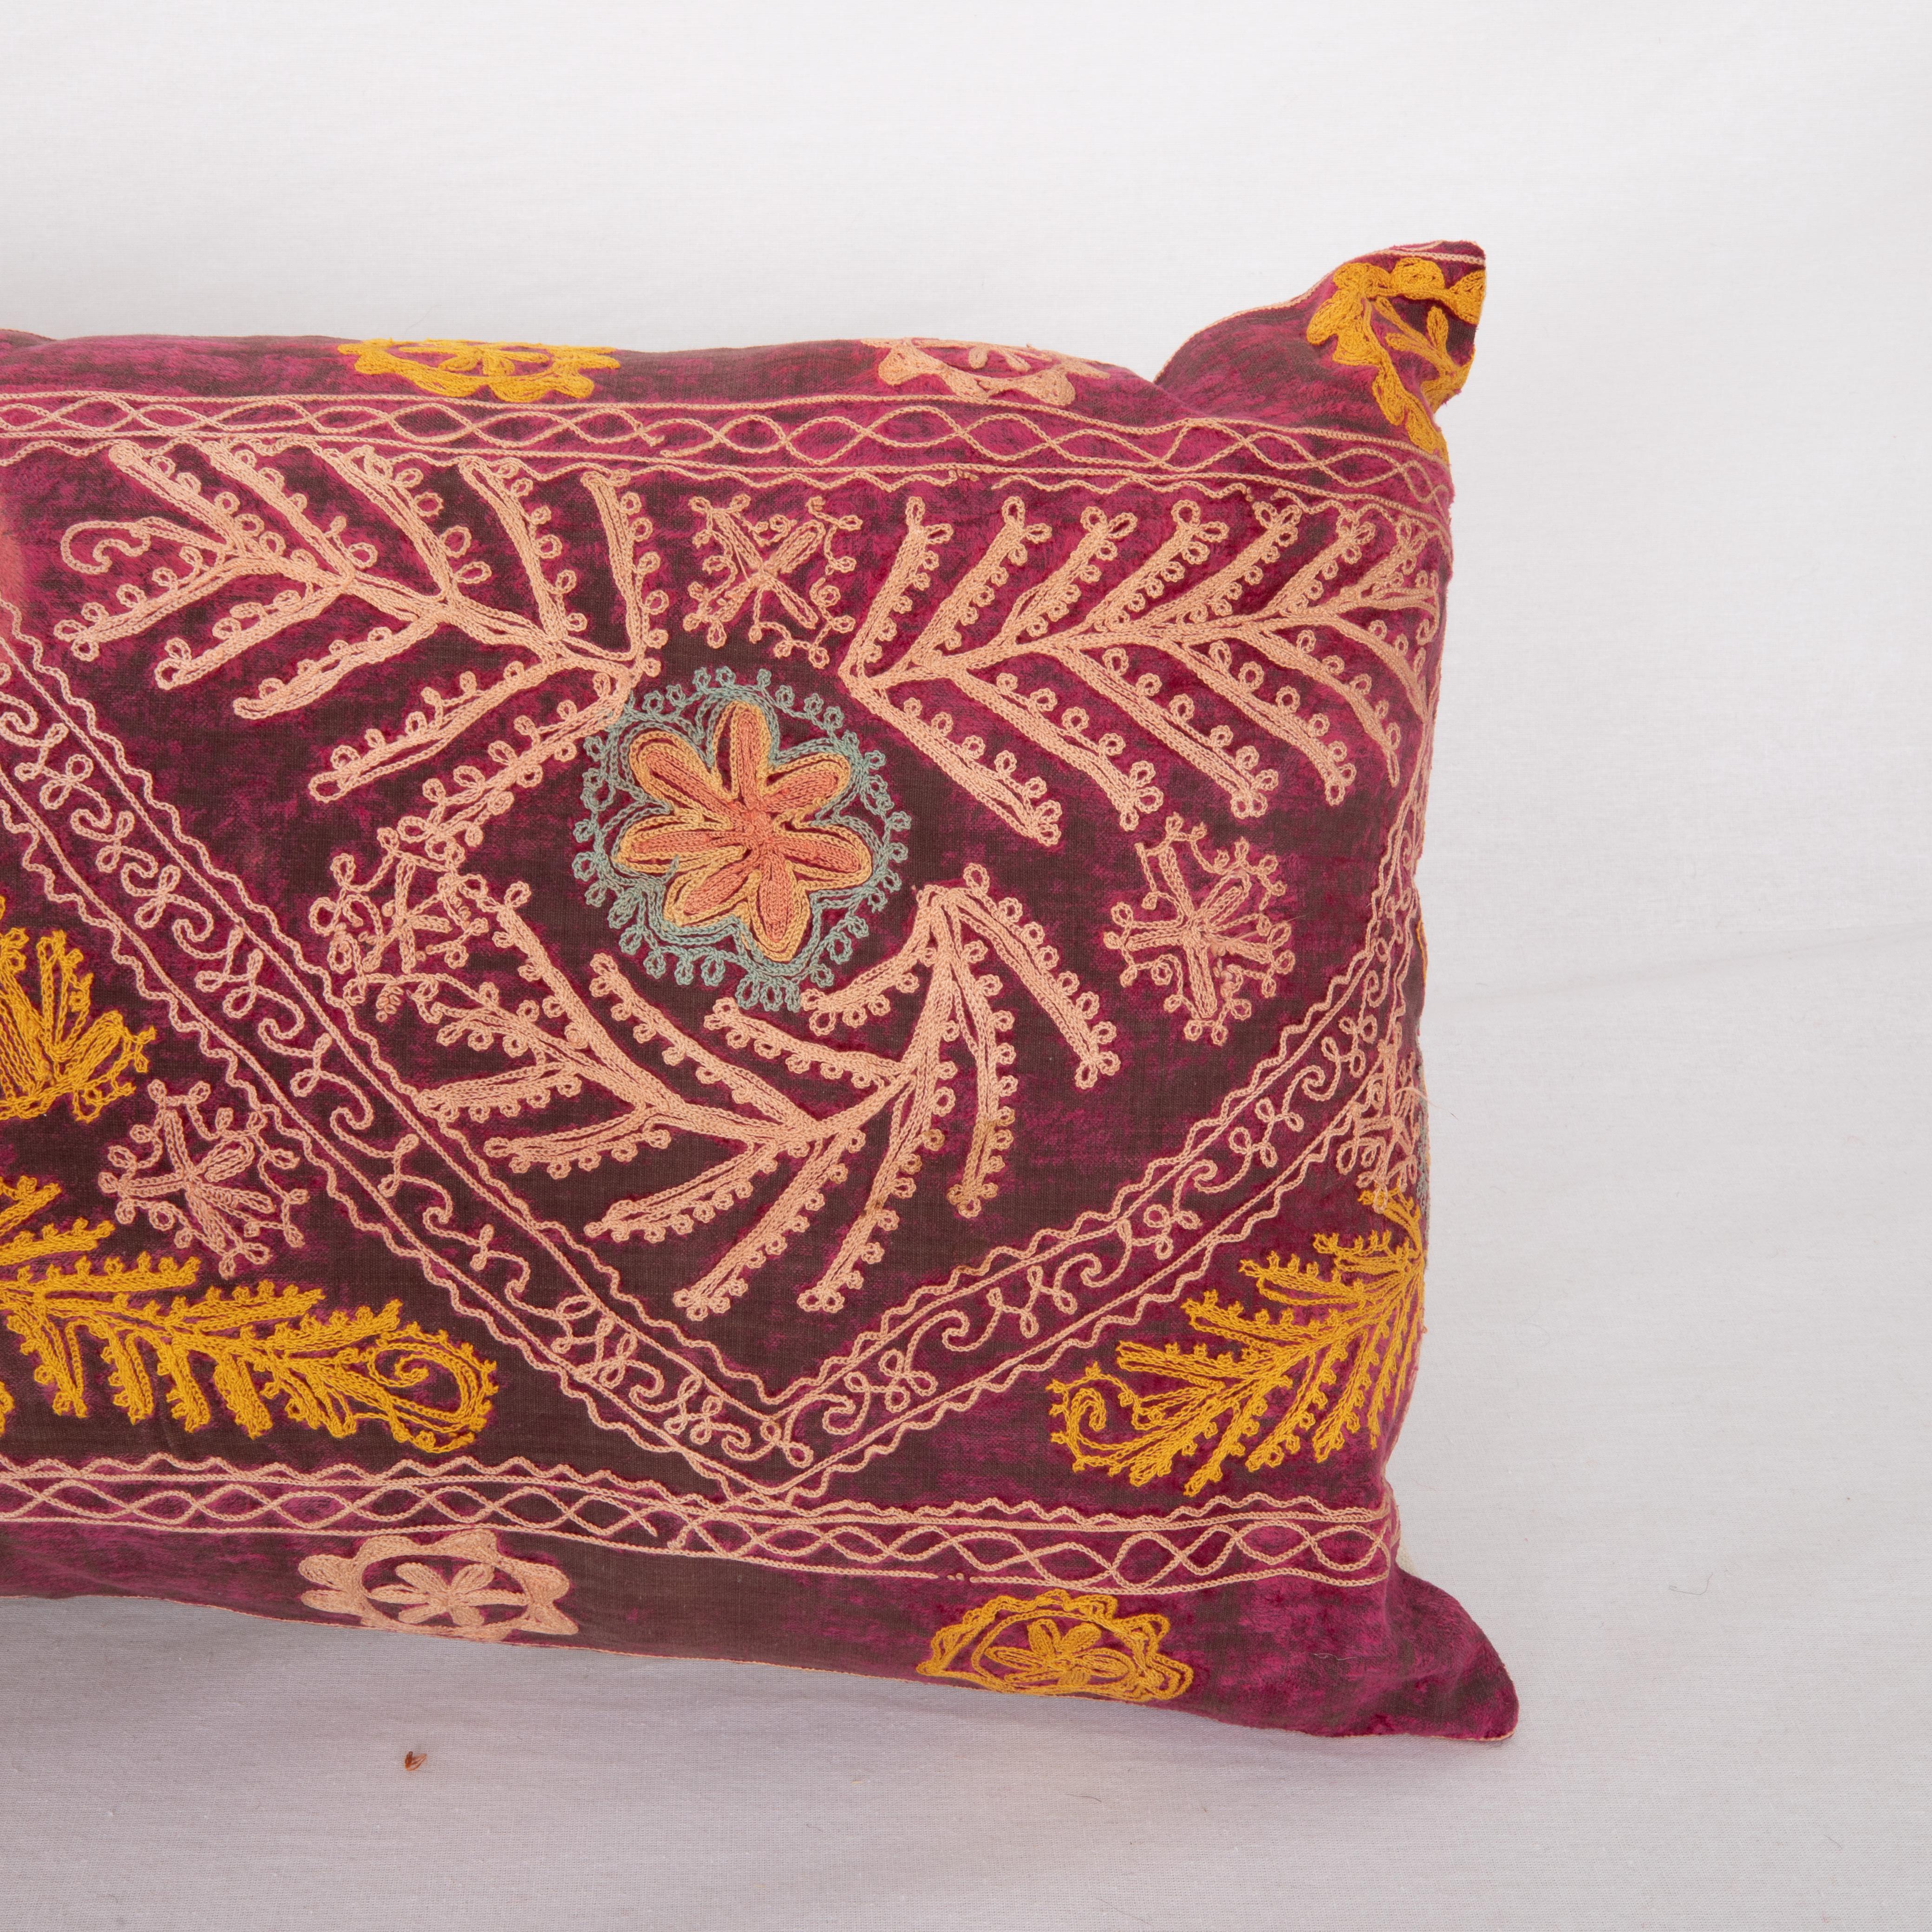 Suzani Pillow Case Made from a Vintage Velvet Ground Suzani, Mid-20th C In Fair Condition For Sale In Istanbul, TR